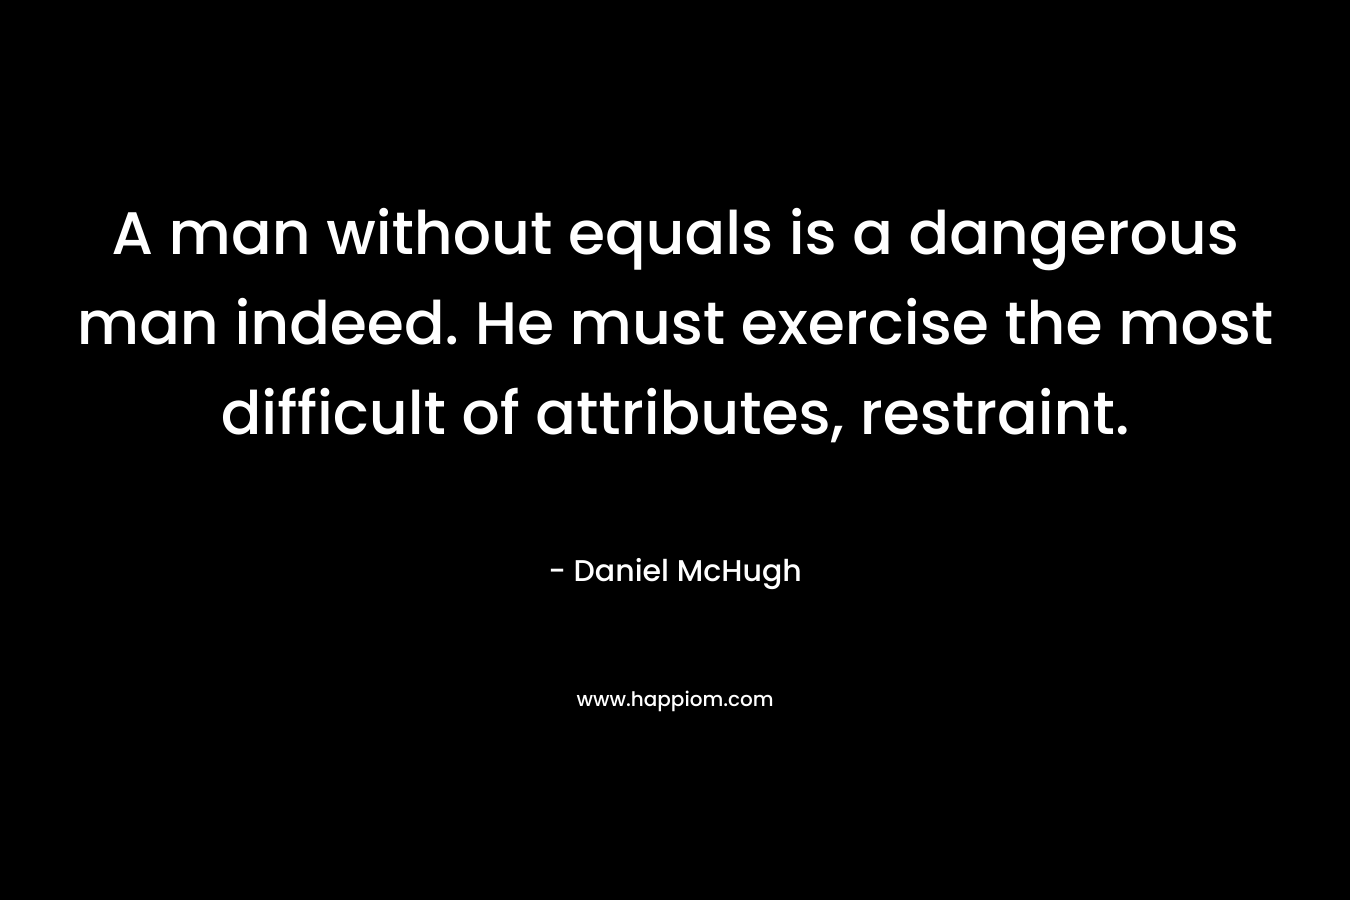 A man without equals is a dangerous man indeed. He must exercise the most difficult of attributes, restraint.